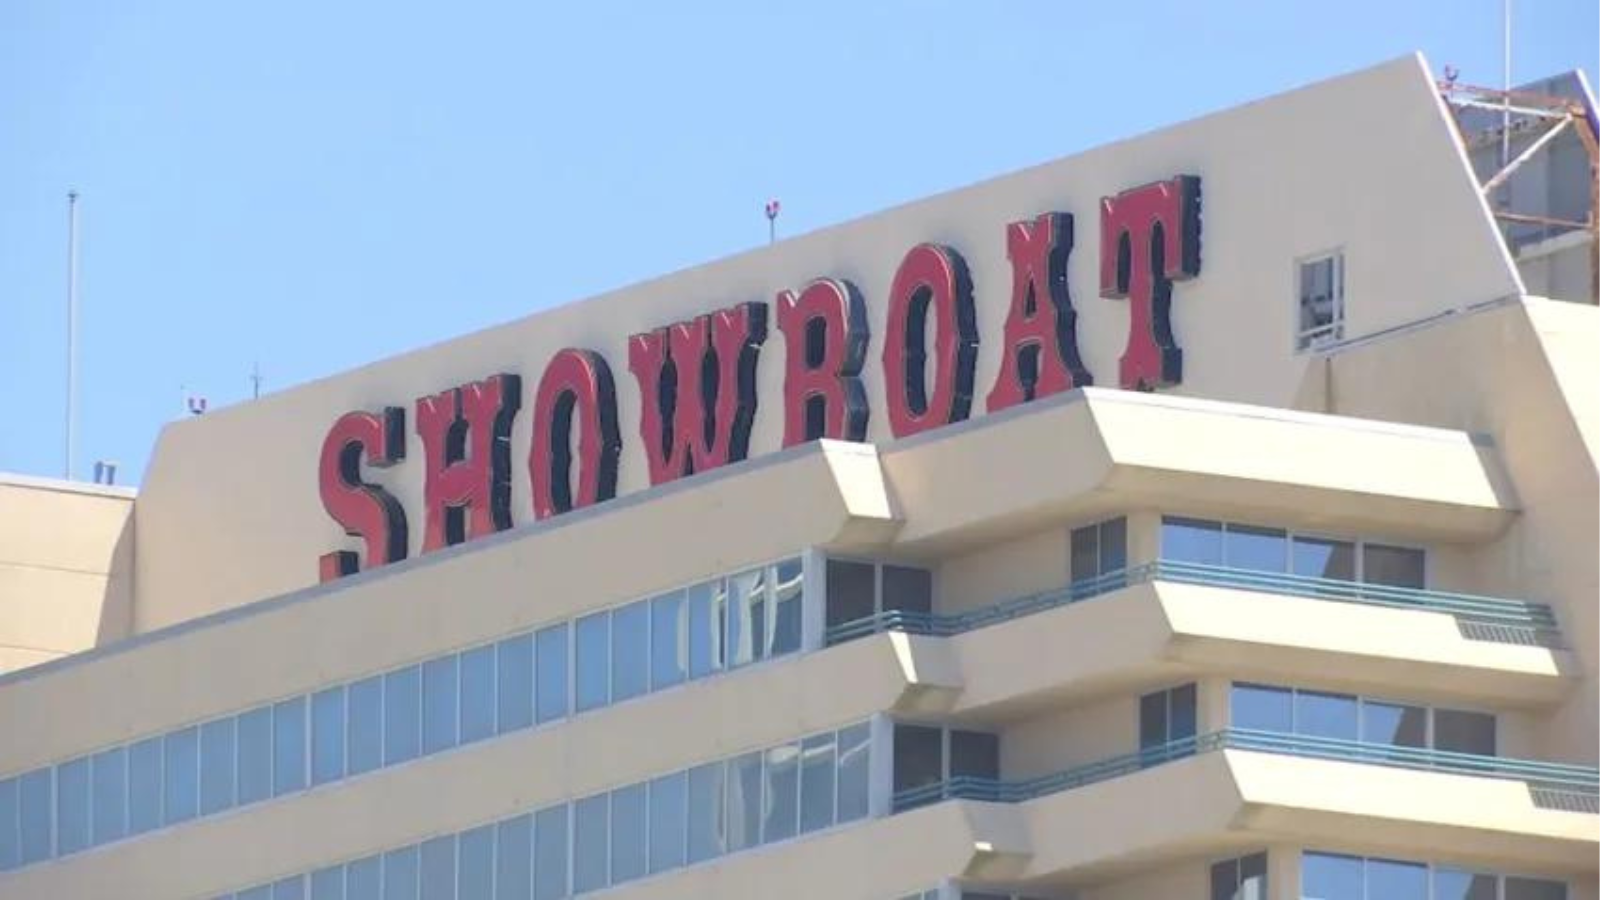 3 suspects arrested, charged in connection to stabbing at AC Showboat Resort